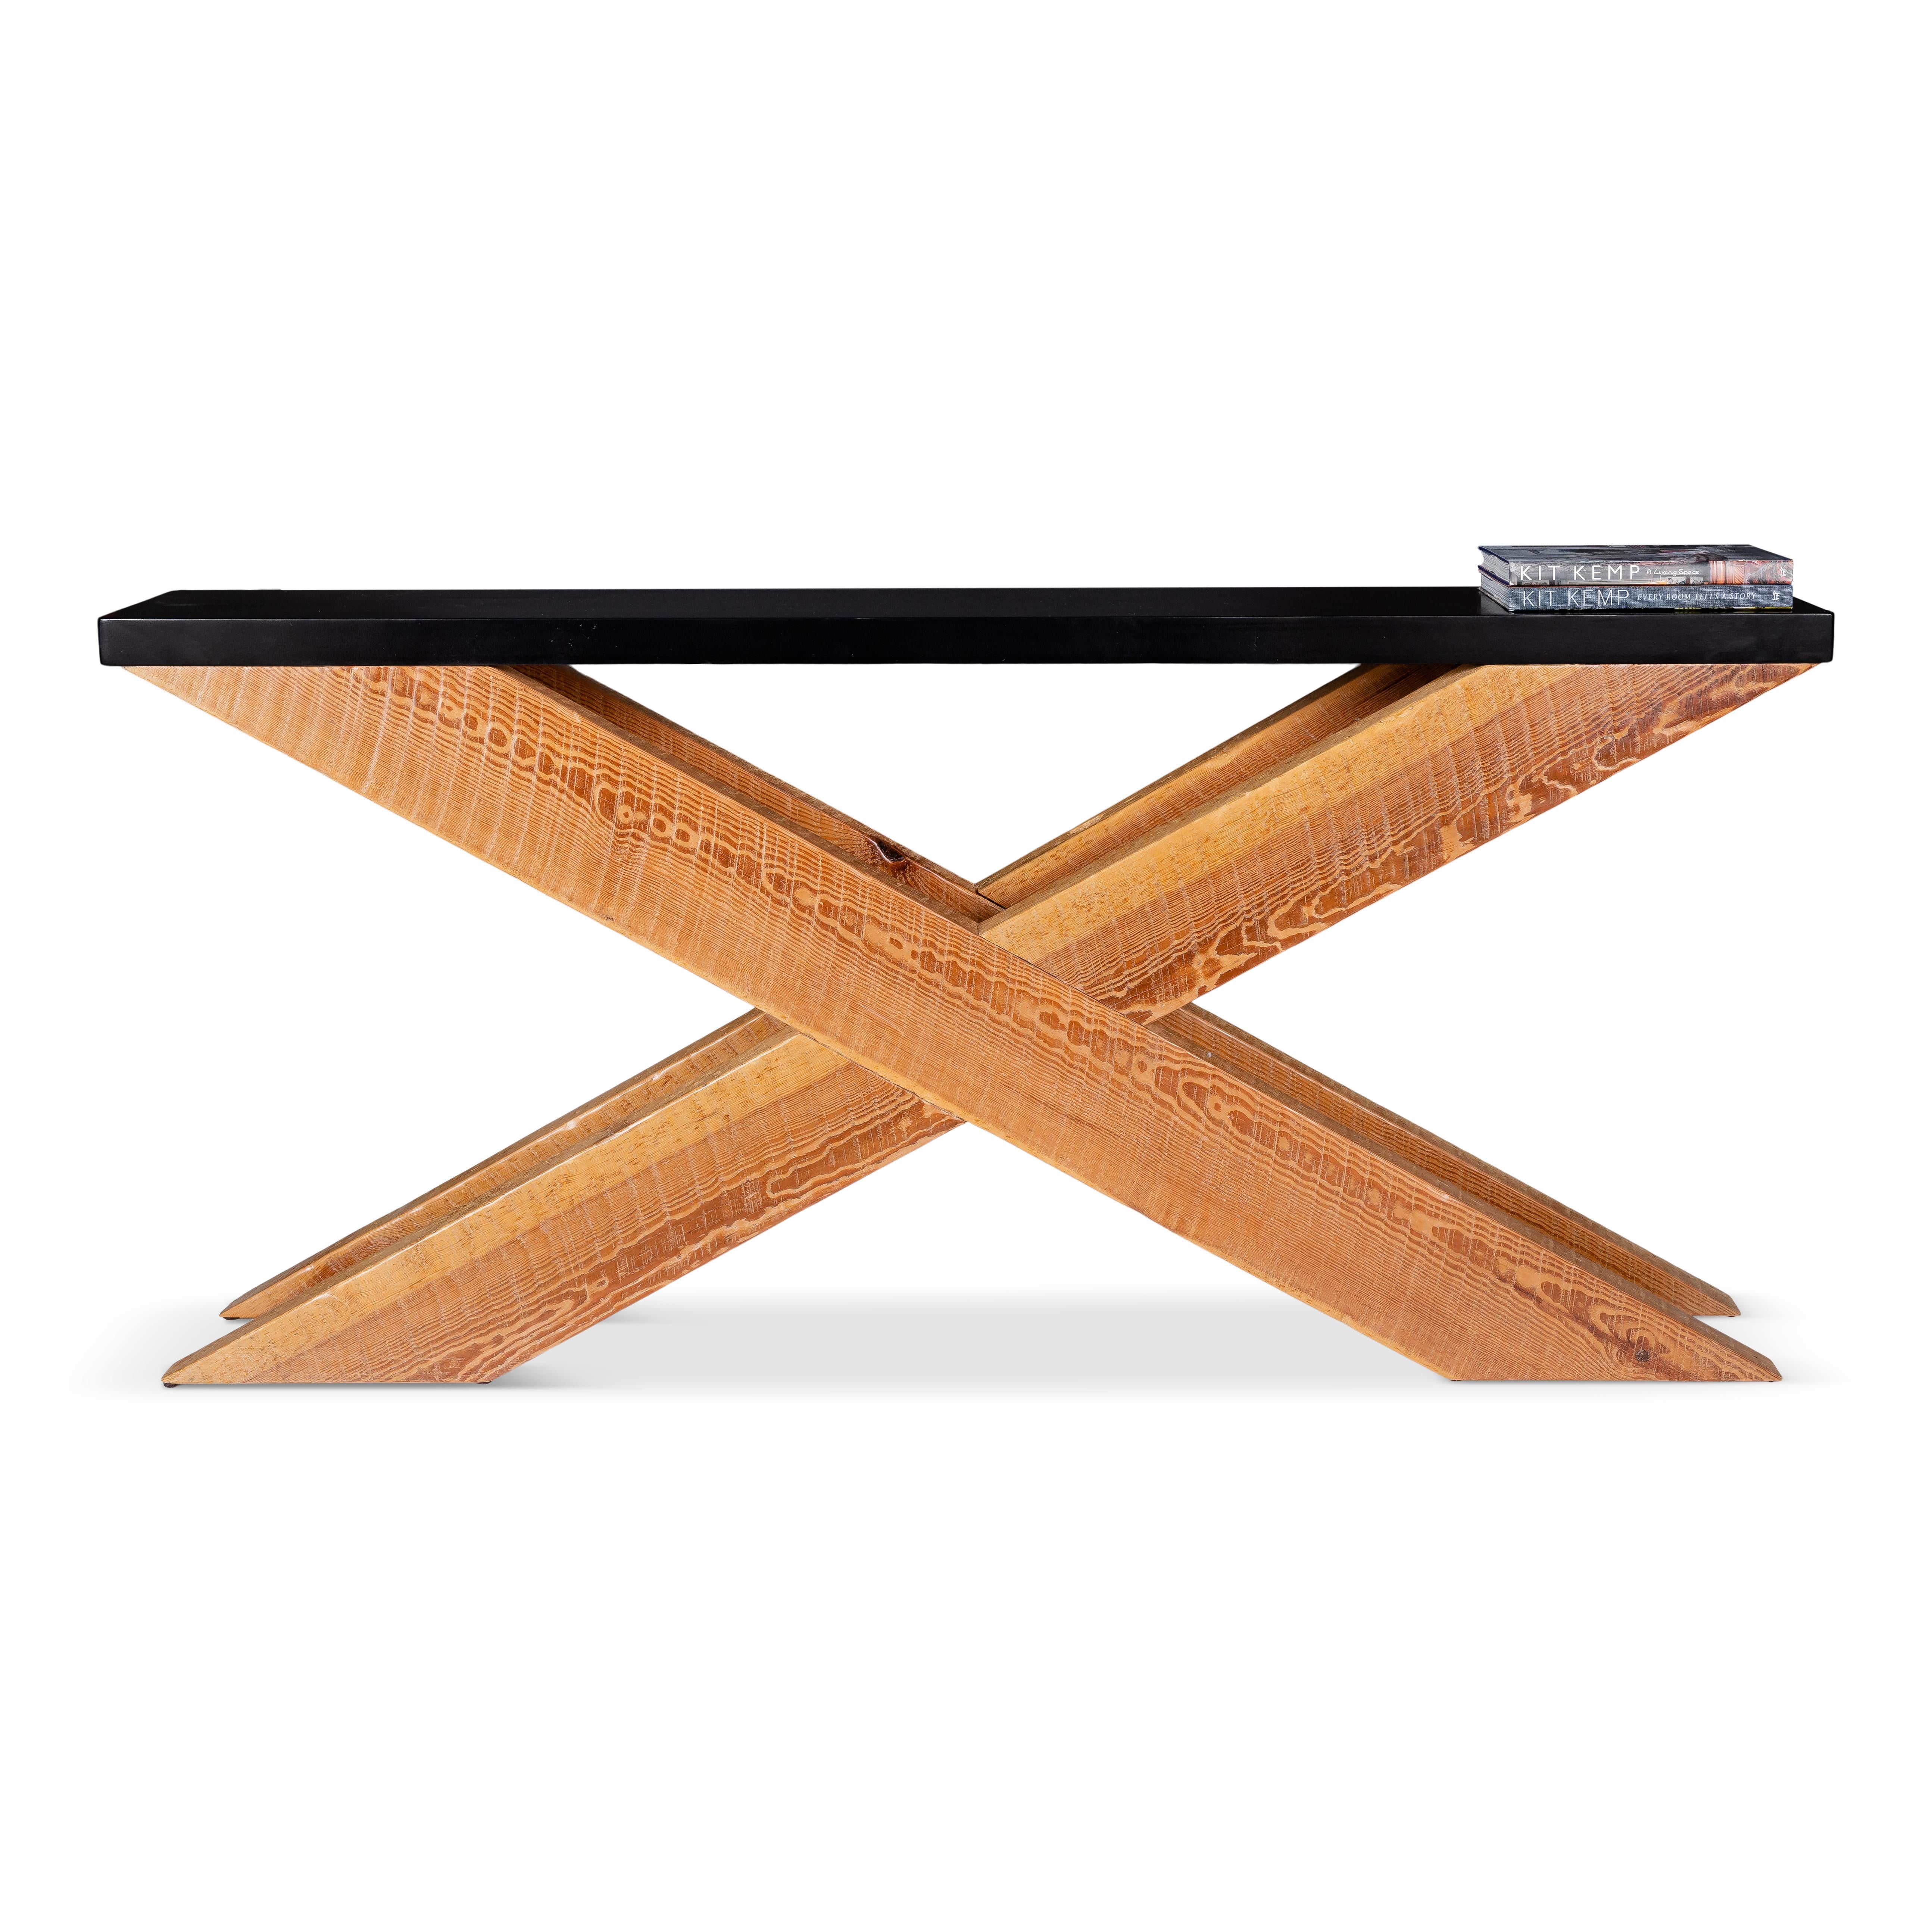 X Form elm console table with ebonized limestone top.

This item is crafted from natural materials. Detailing may vary, adding to its uniqueness. 

Piece from our one of a kind collection, Le Monde. Exclusive to Brendan Bass.

Globally curated